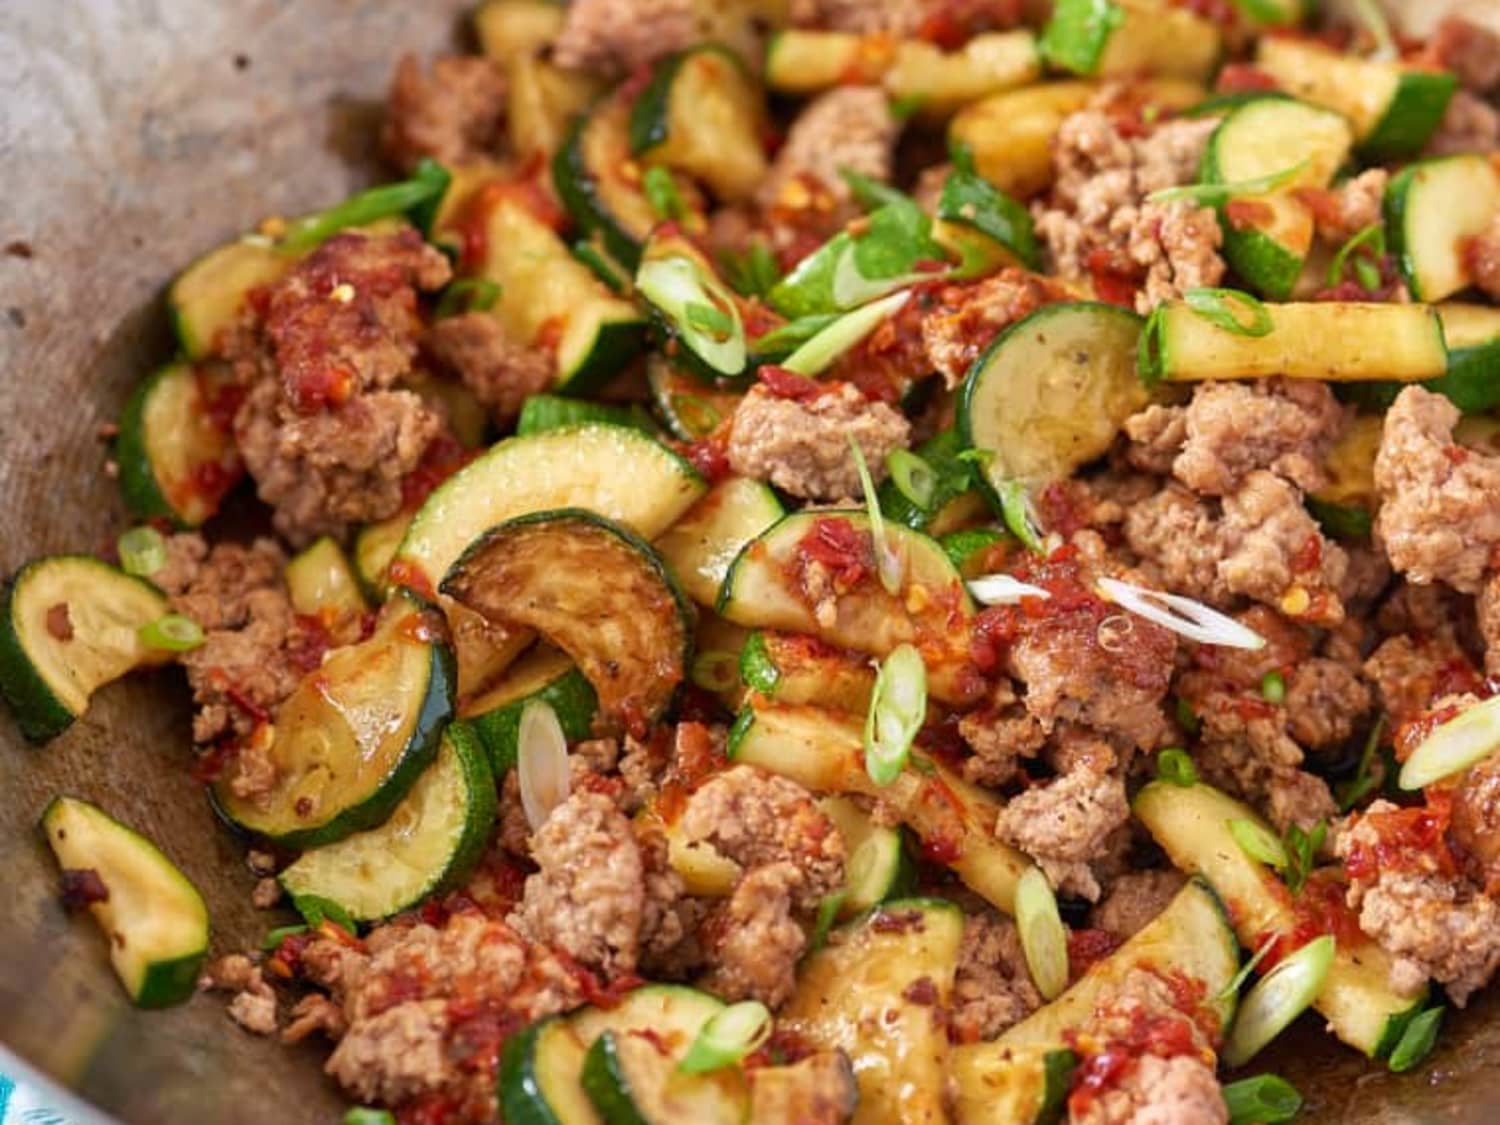 Zucchini Stir Fry - The flavours of kitchen